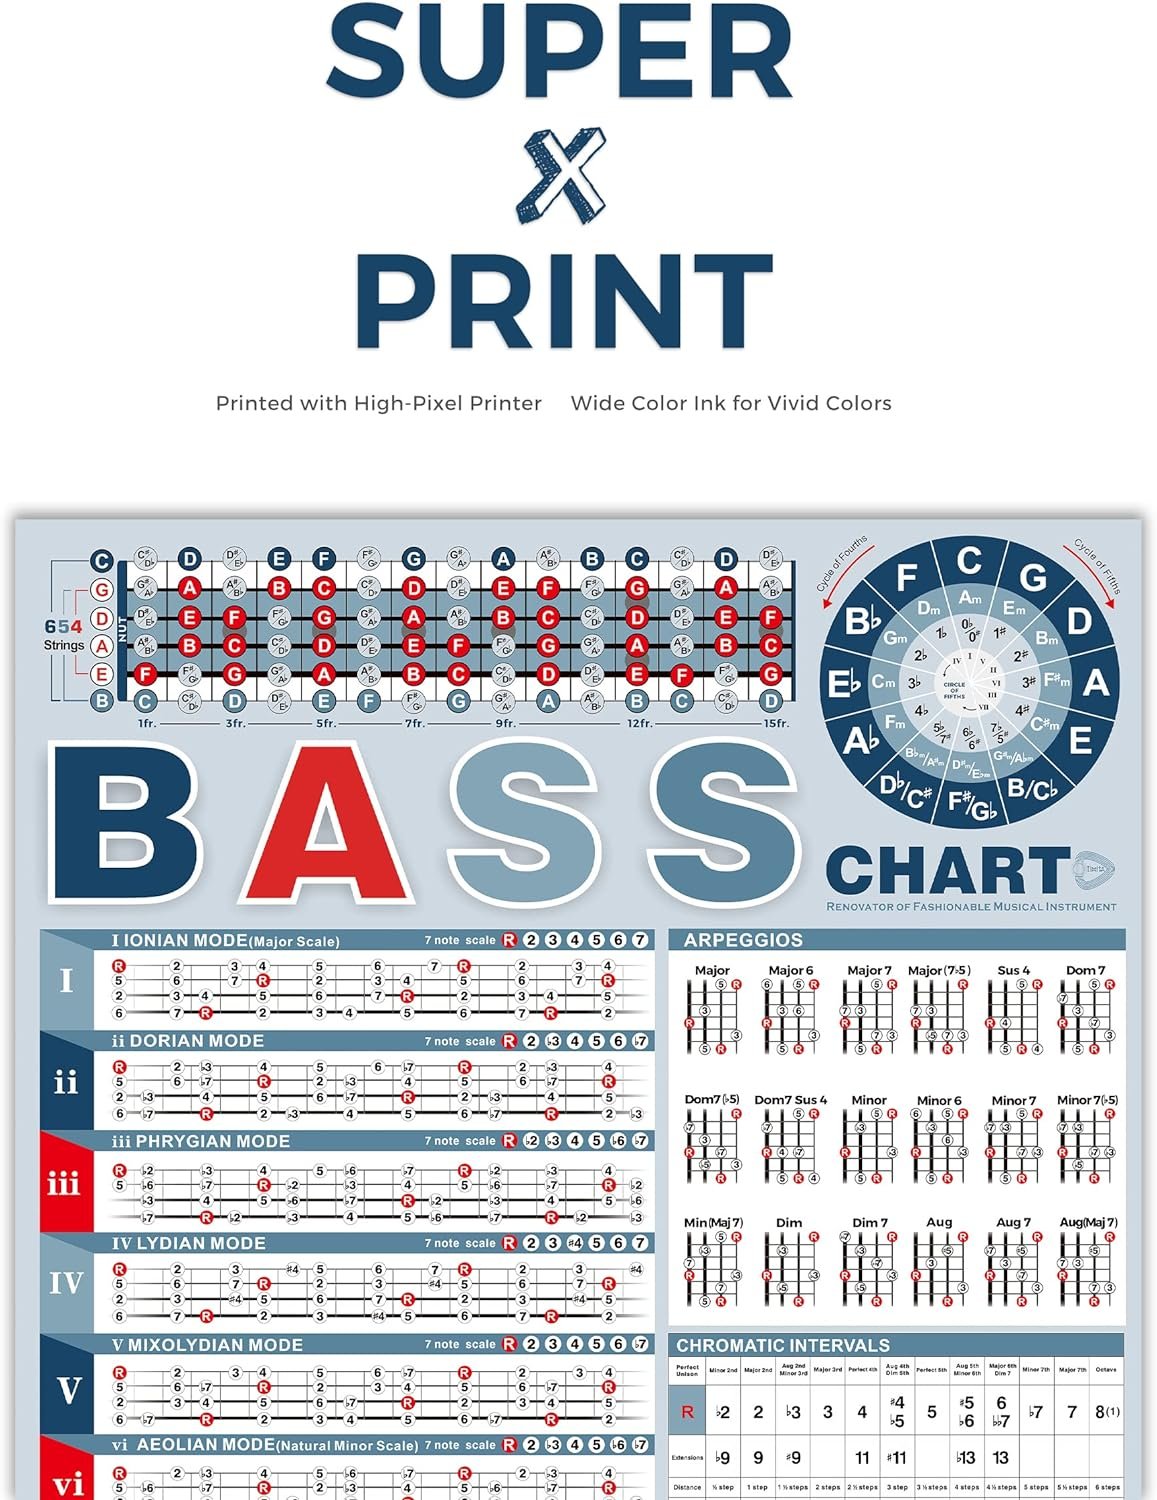 Mandolin Chords Chart of Popular Chords, Mandolin Instrument Fretboard Notes and Circle of Fifths, Useful for Mandolin Beginners Adult or Kid, Acoustic 8 String Mandolins Chords Poster